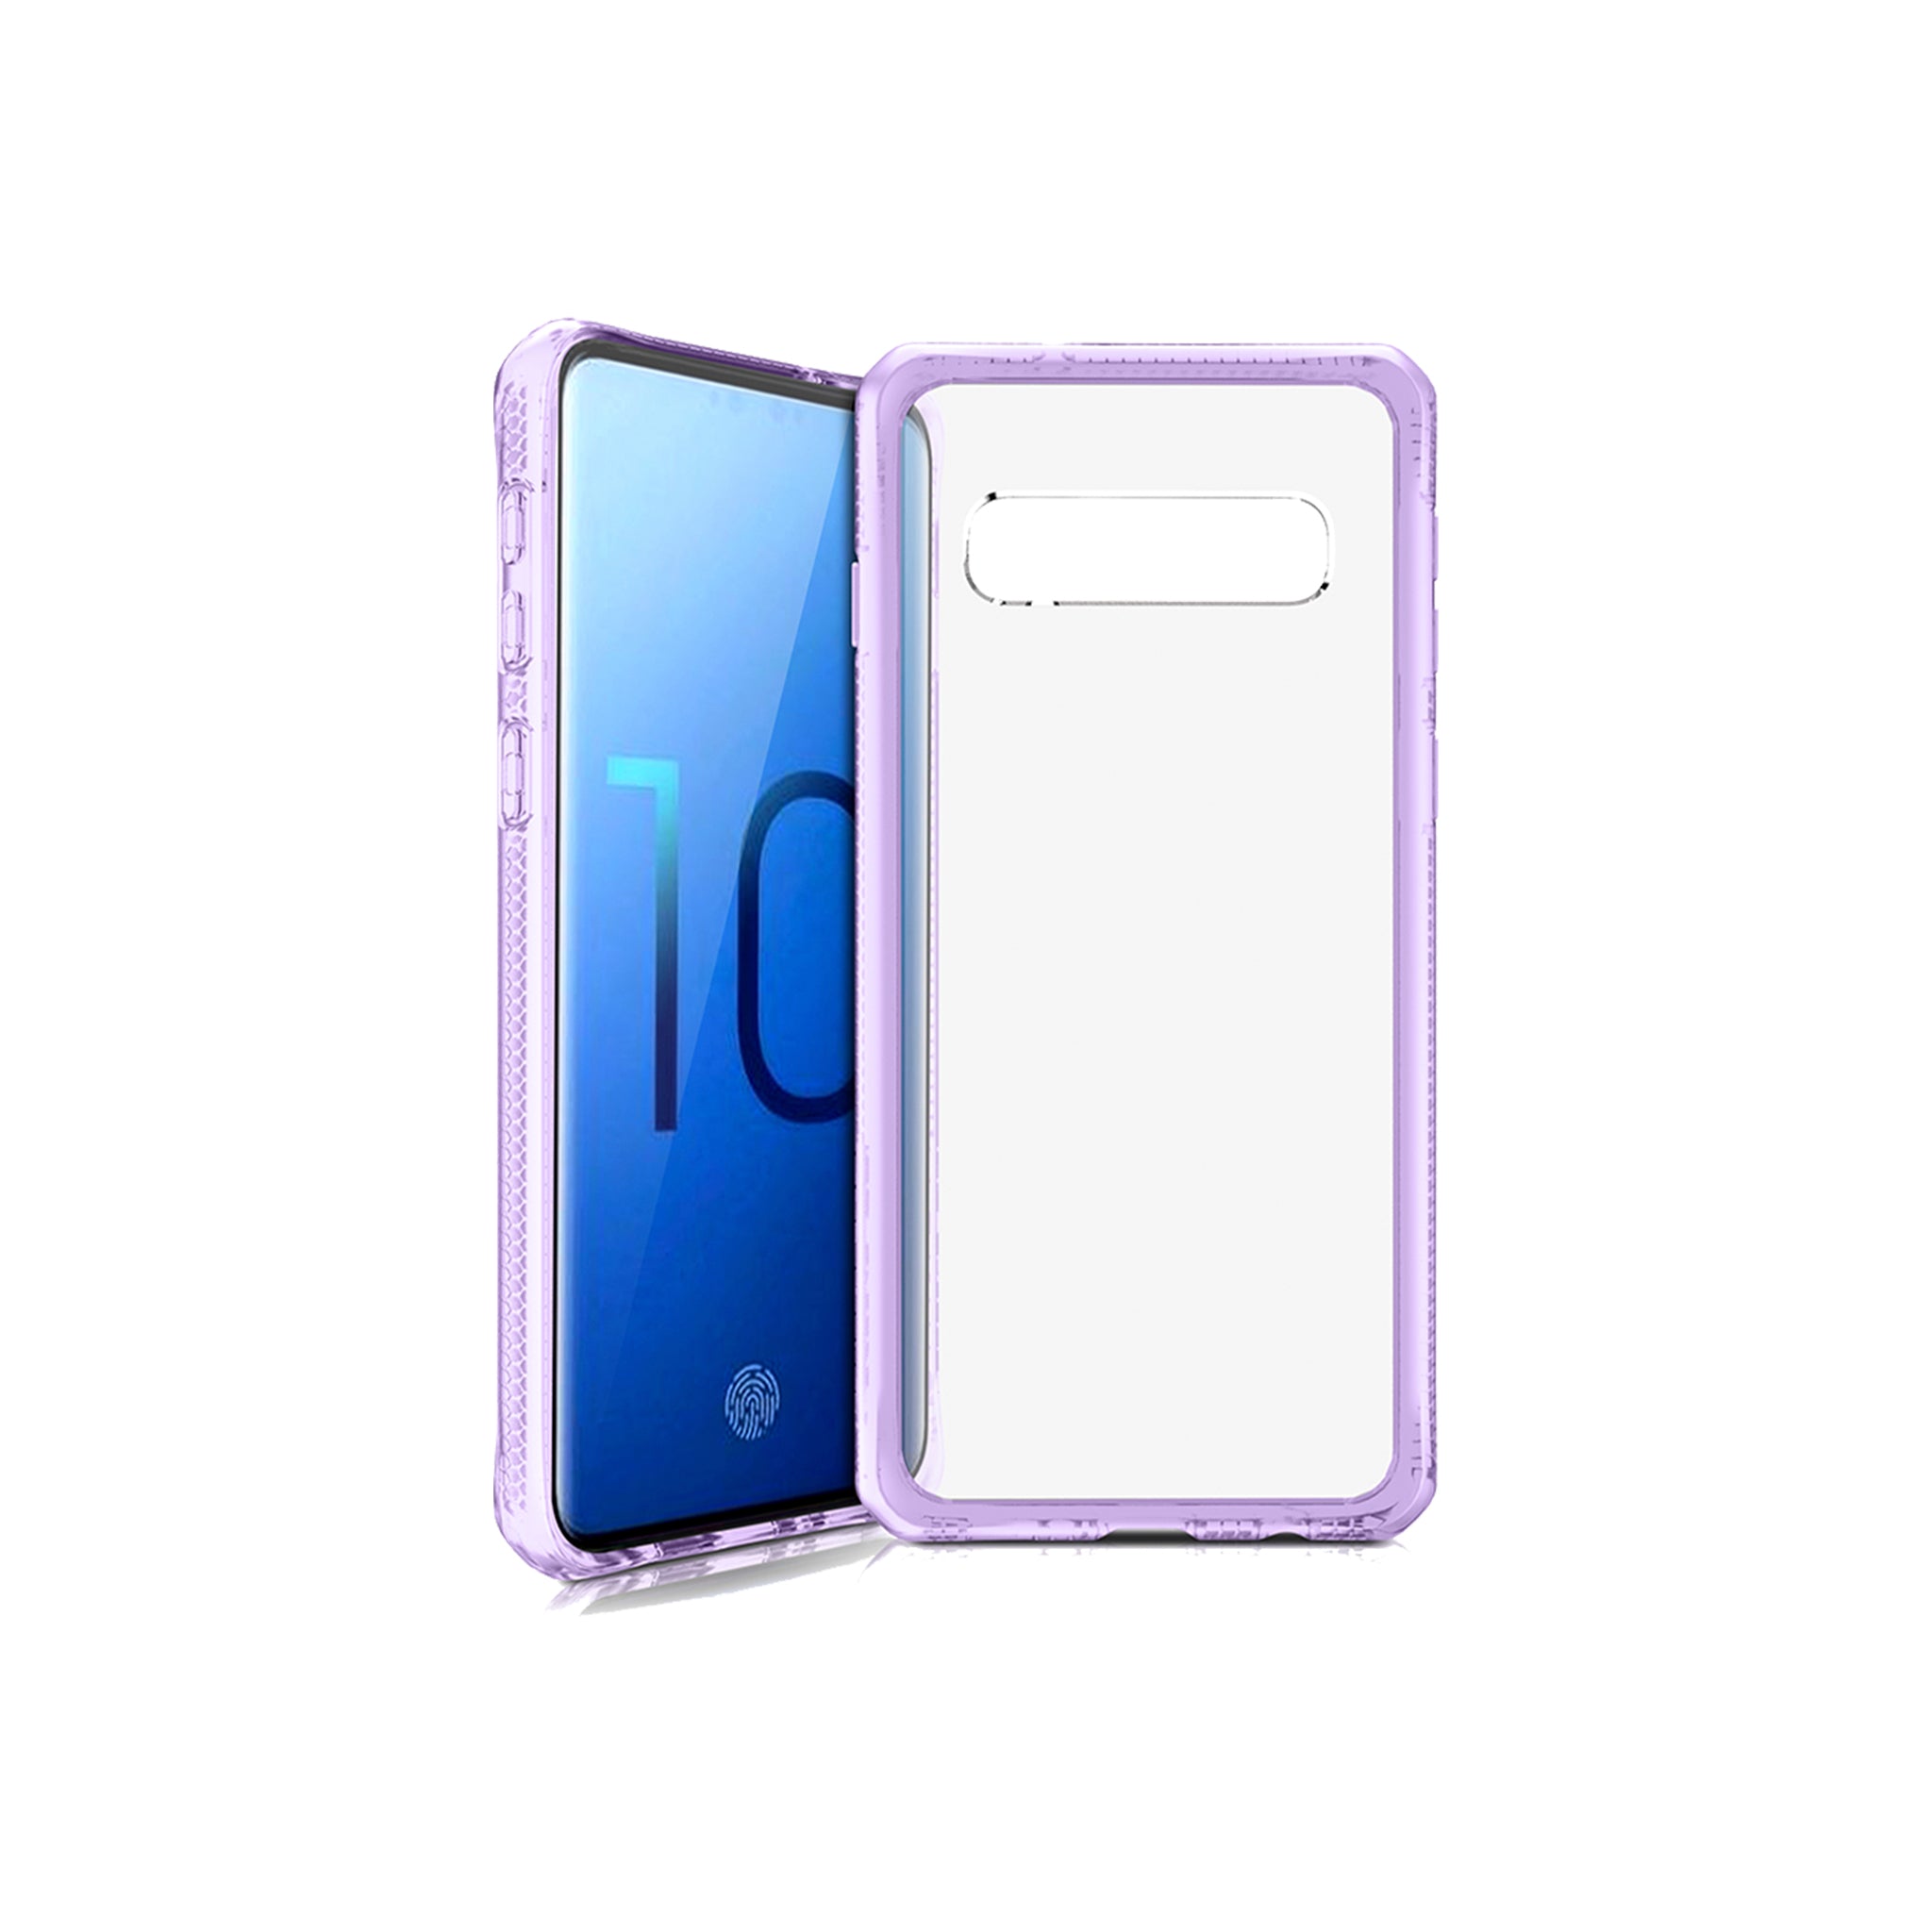 Itskins - Hybrid Frost Mkii Case For Samsung Galaxy S10 - Light Purple And Transparent